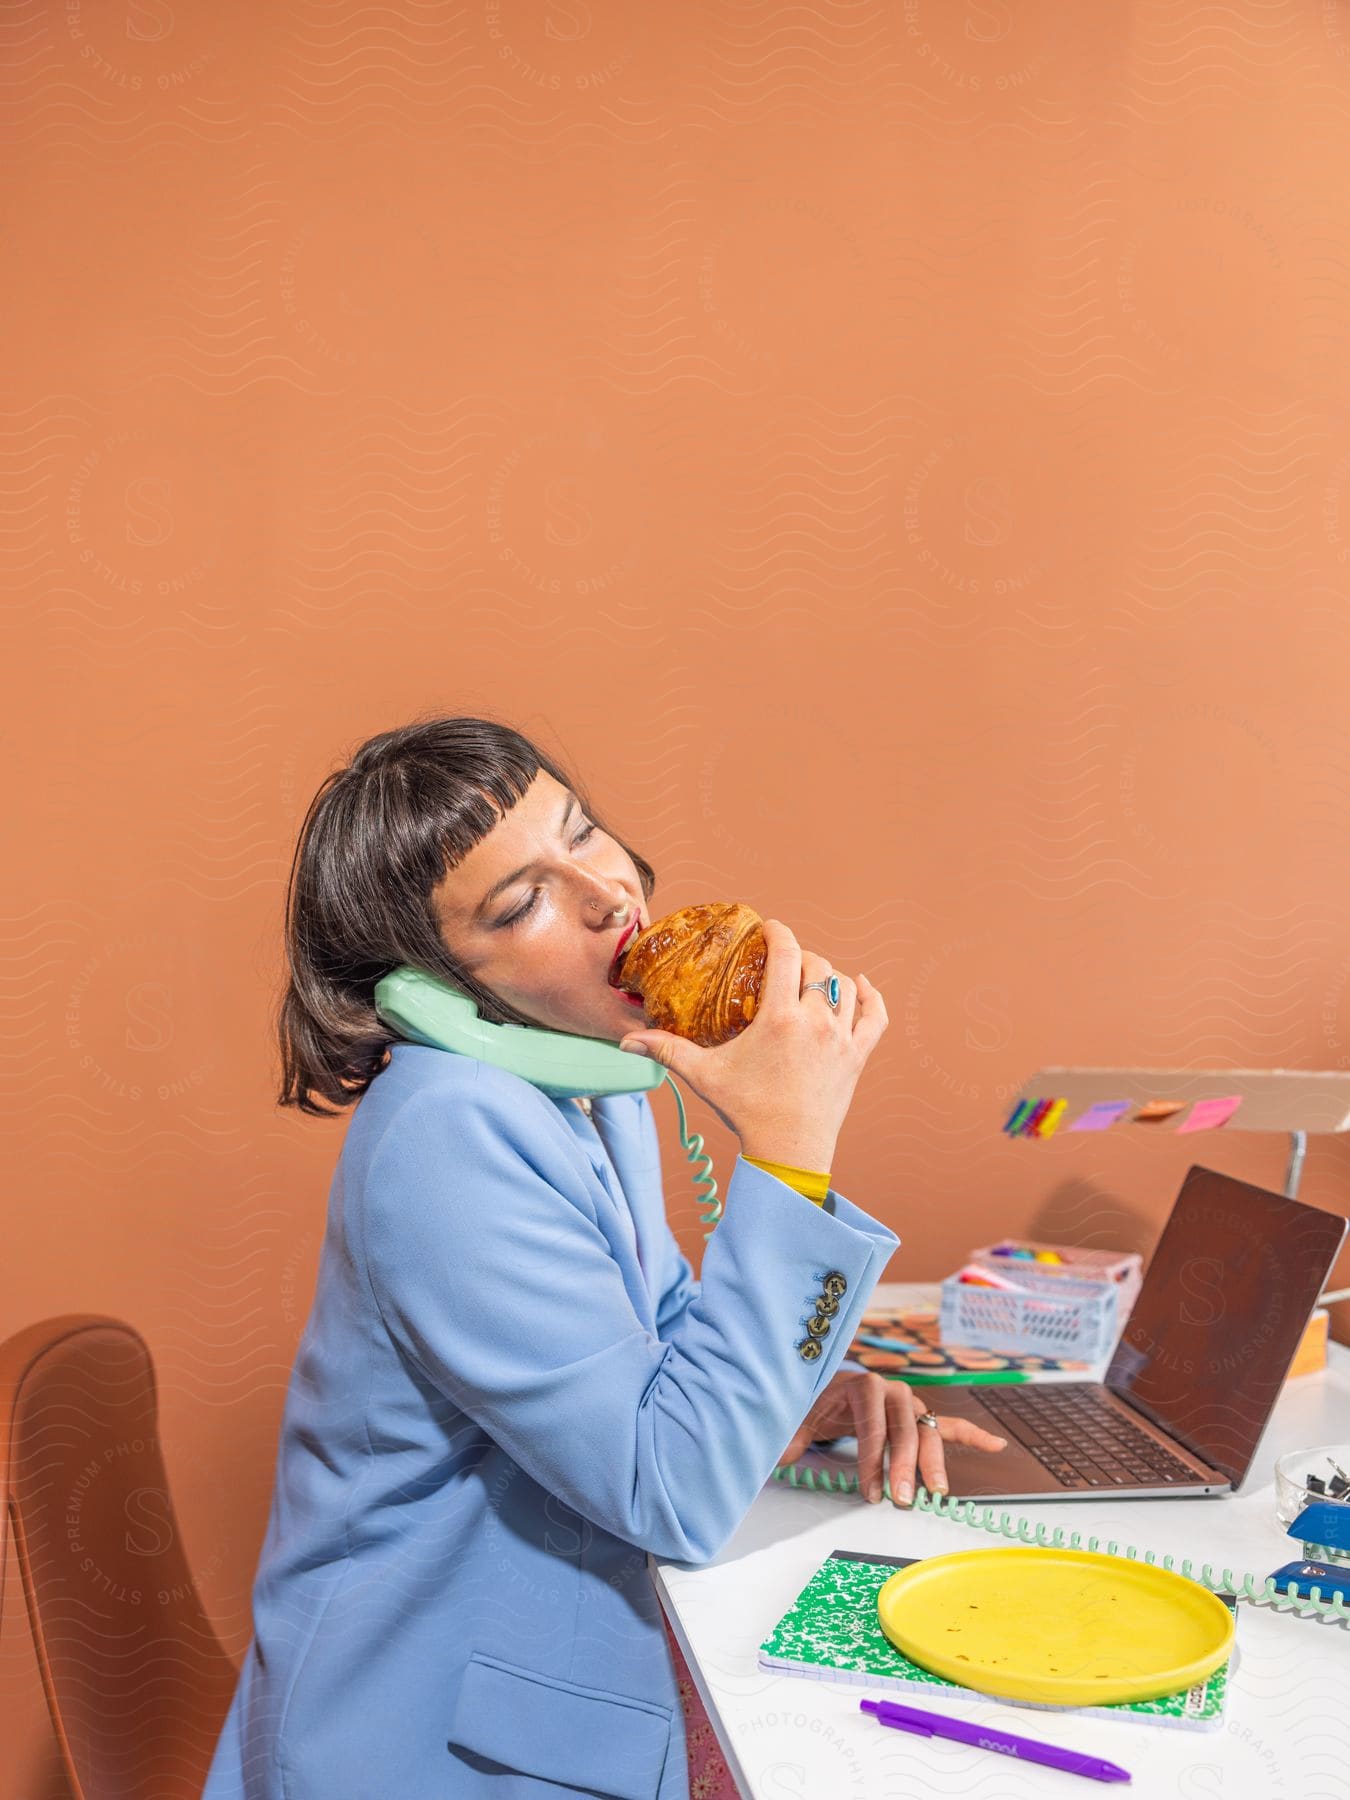 Modeling woman wearing a light blue blazer and pretending to eat a croissant while answering a phone call.